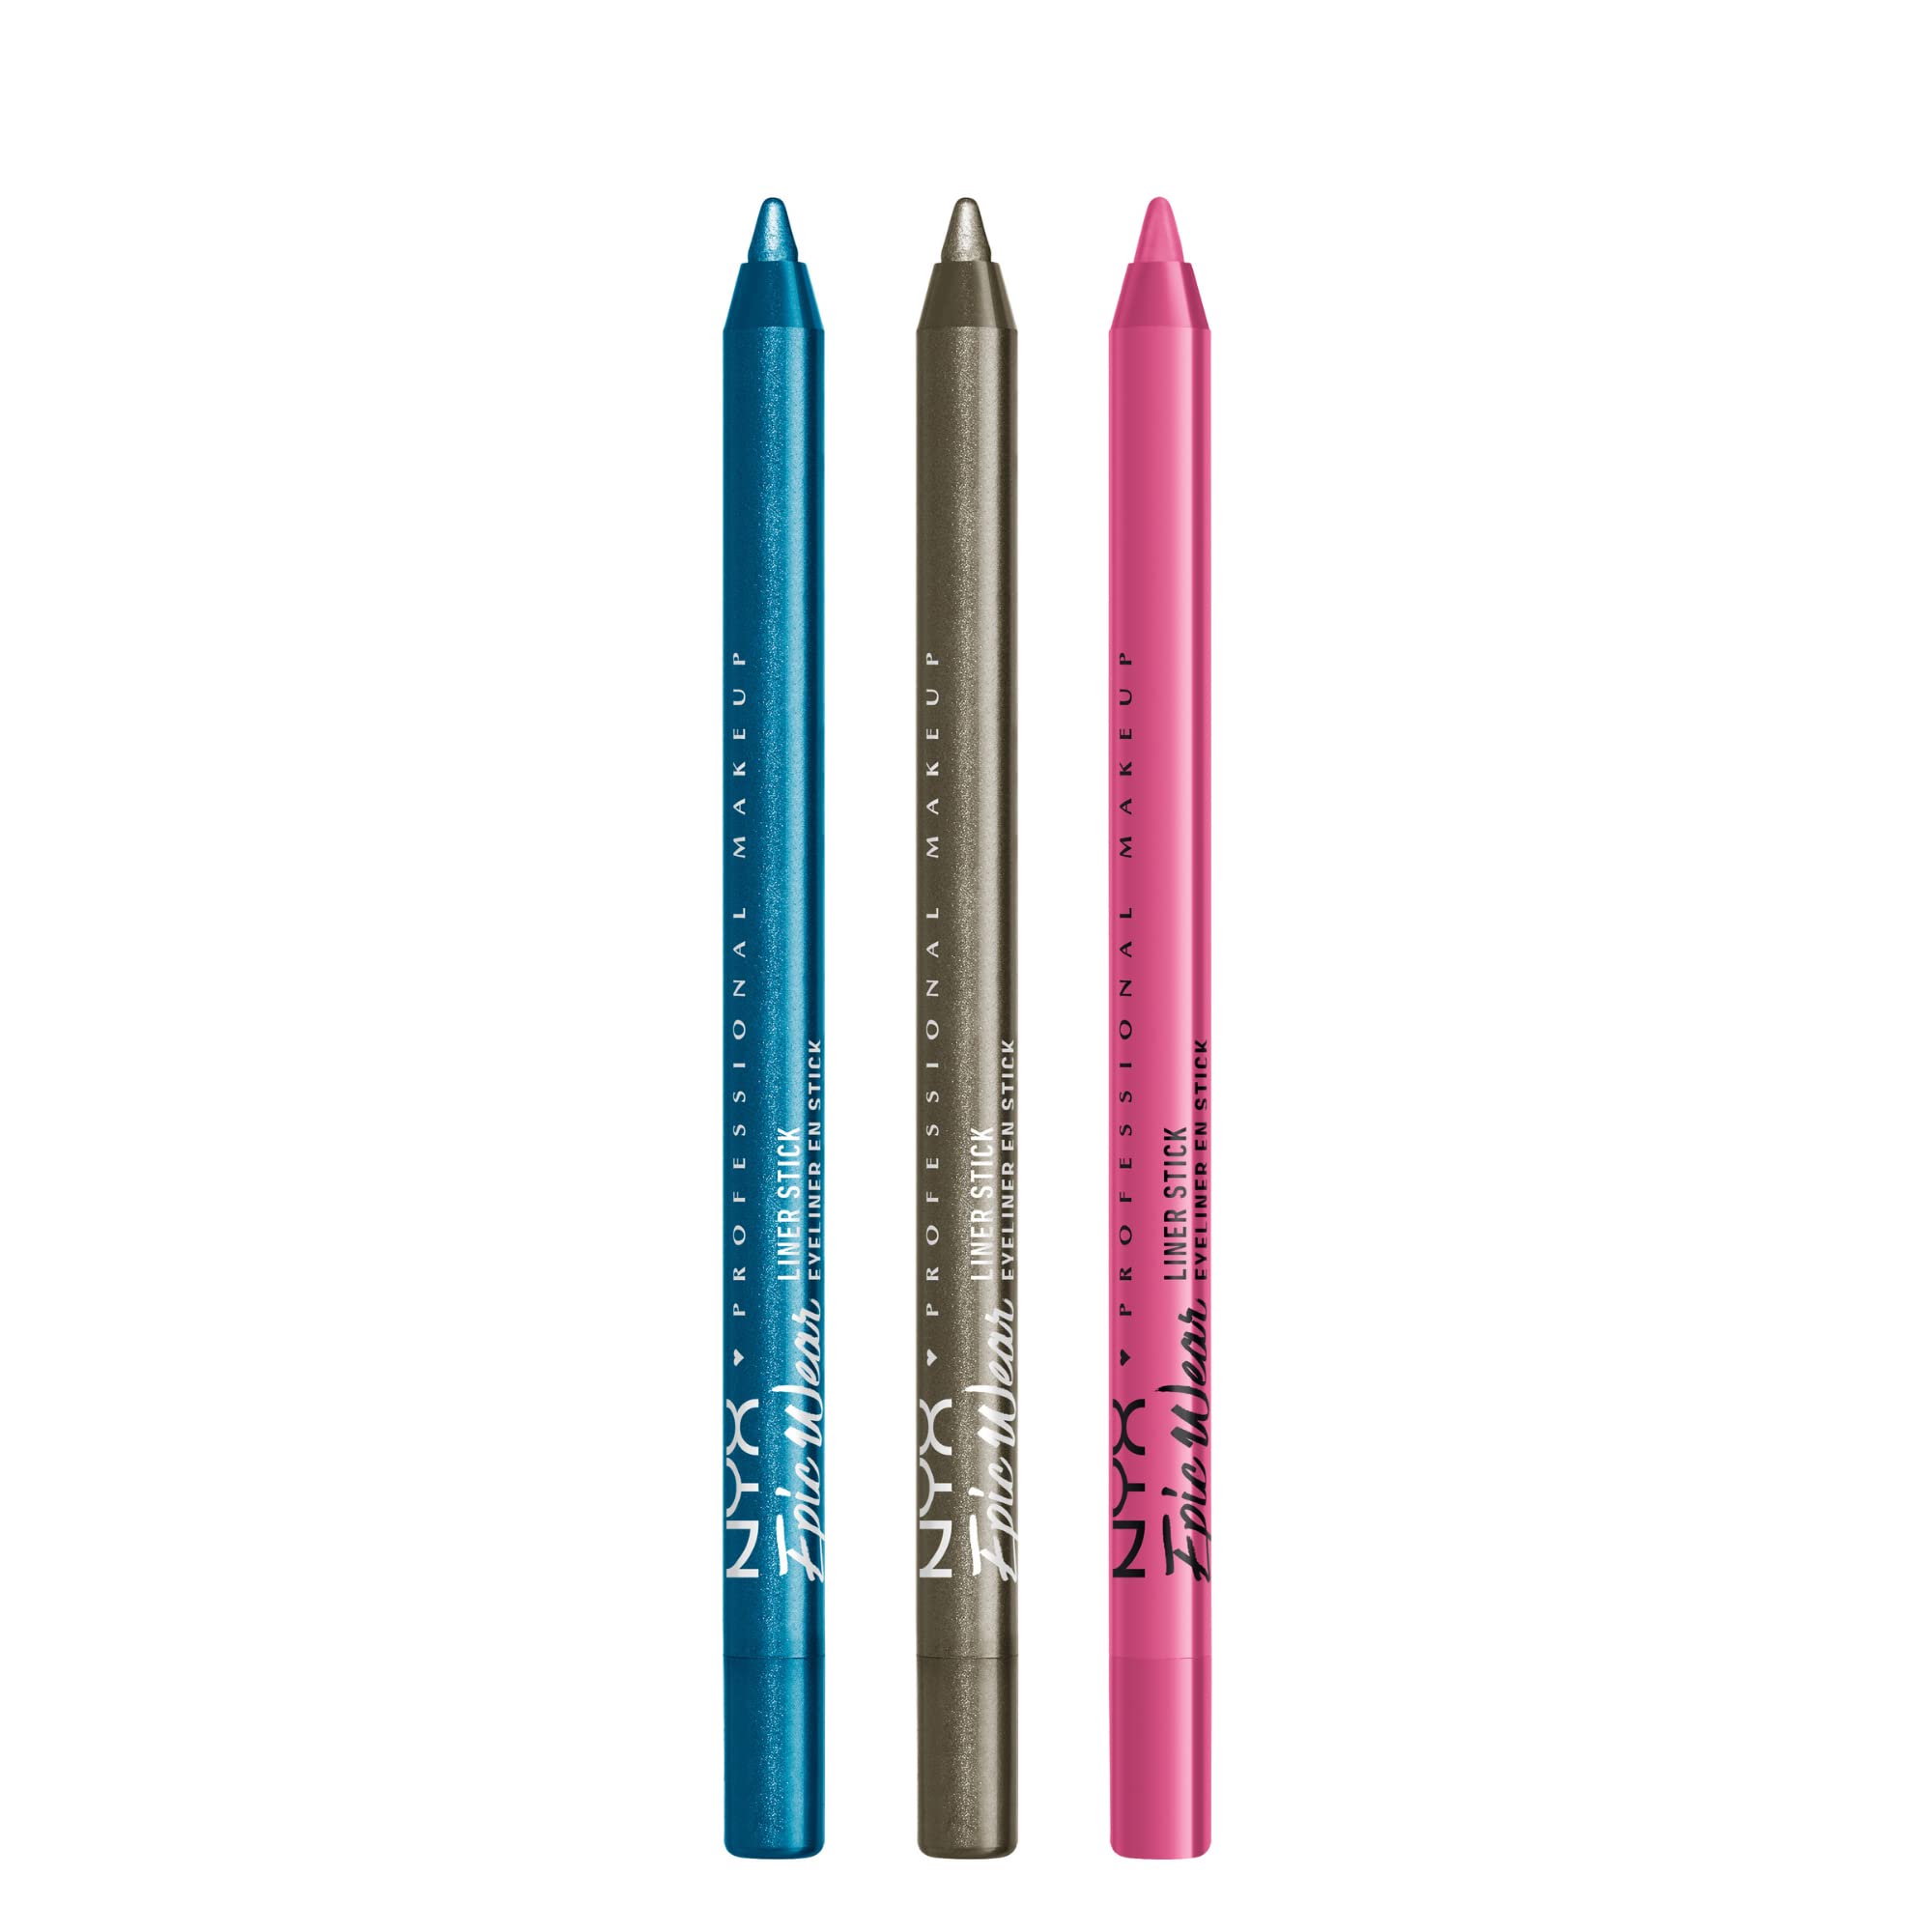 NYX PROFESSIONAL MAKEUP Stick Epic Eyeliner (Turquoise Liner Long-Lasting Wear Pencil of Storm Pack - 3